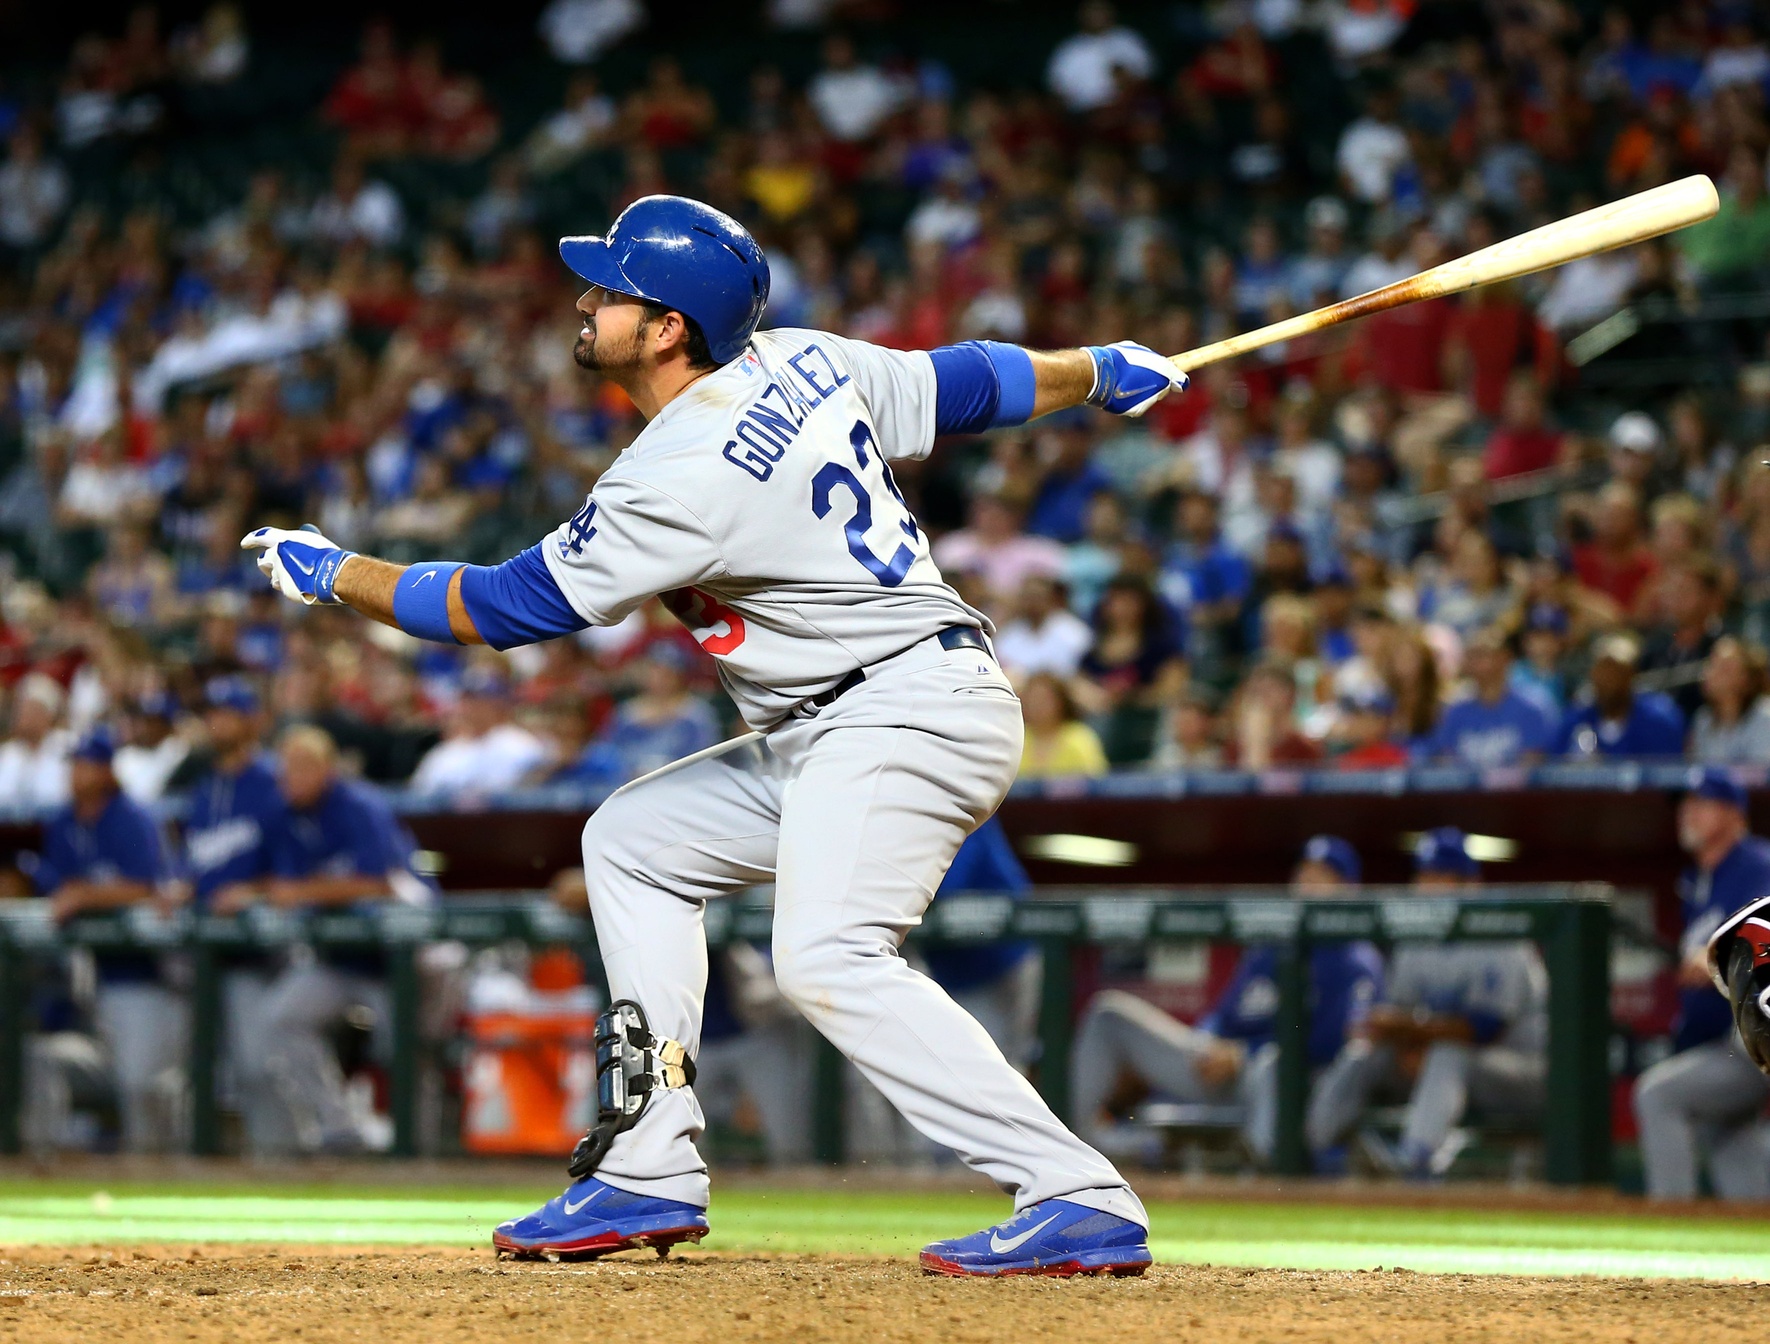 Adrian Gonzalez looks to lead the Dodgers to another division crown. Photo via Mark J. Rebilas, USA Today Sports Images